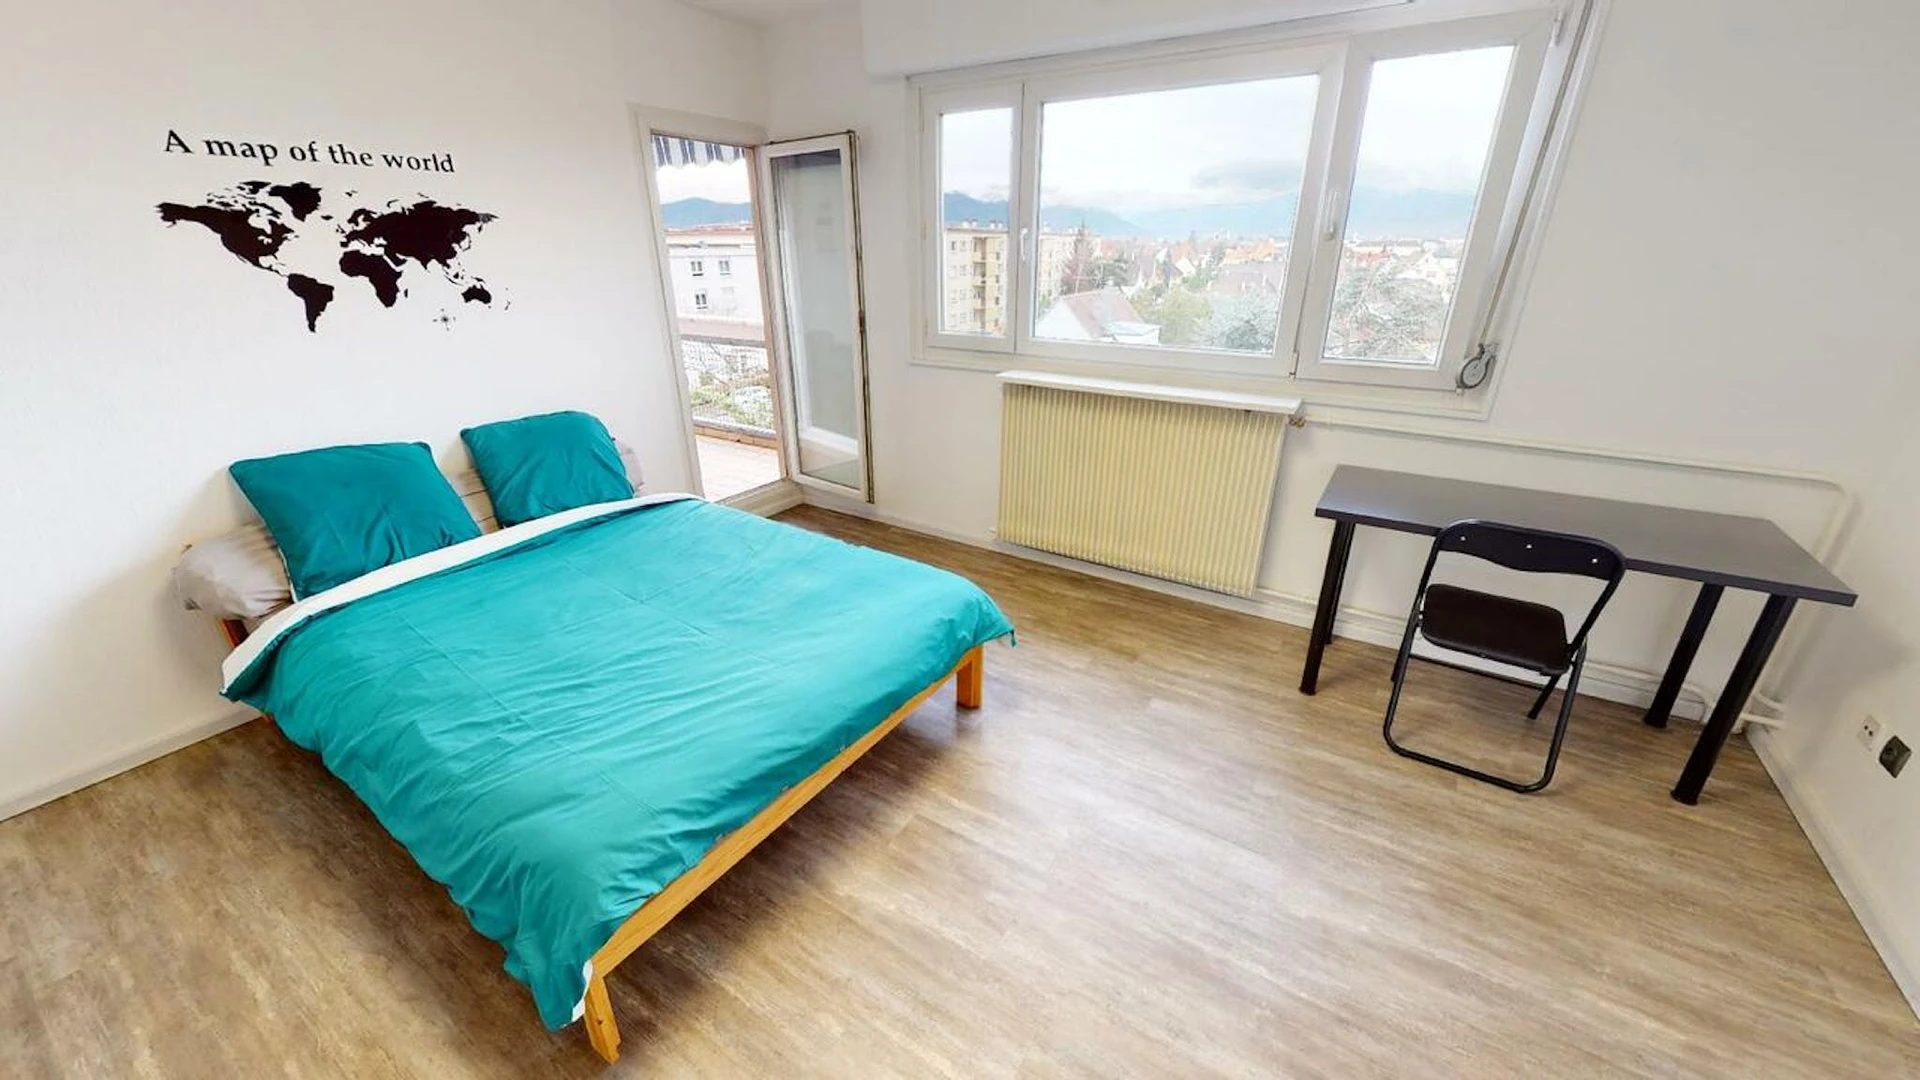 Room for rent in a shared flat in colmar